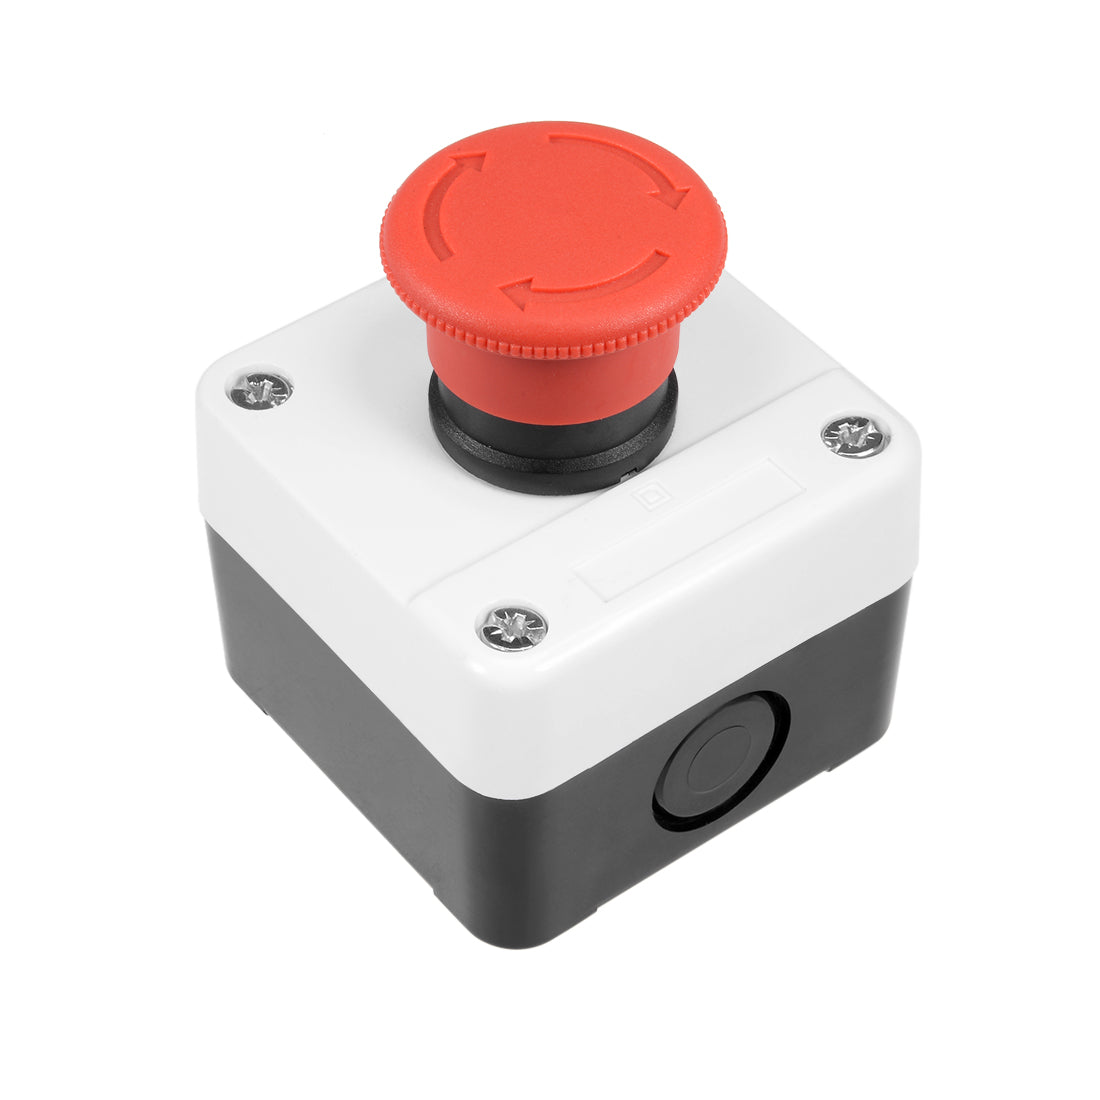 uxcell Uxcell Push Button Switch Station, Red Mushroom Self Lock Emergency Stop, 400V 10A/6A